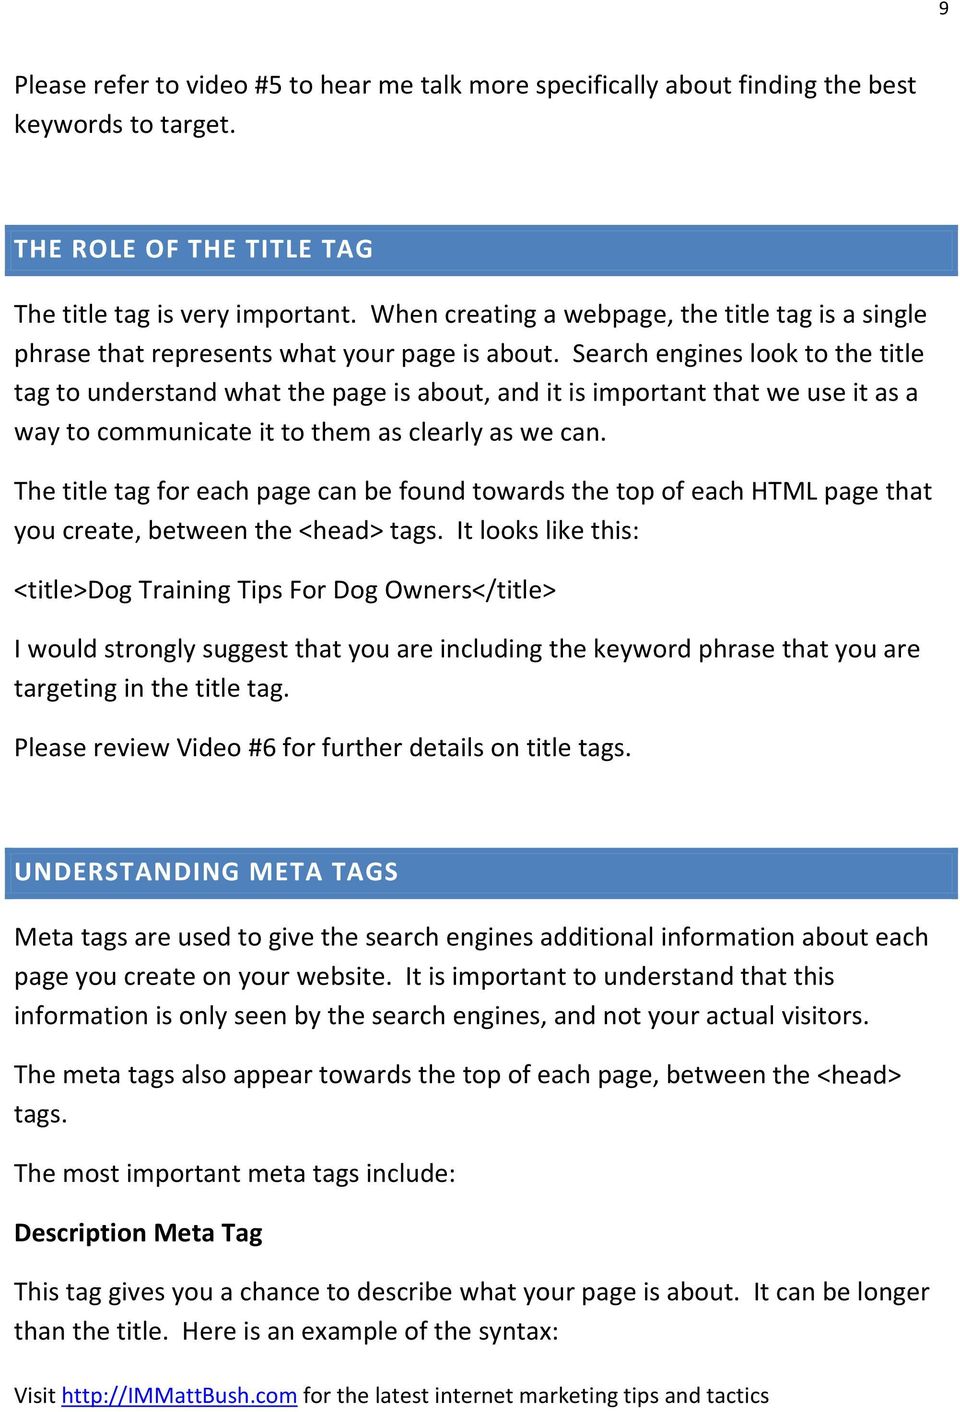 Search engines look to the title tag to understand what the page is about, and it is important that we use it as a way to communicate it to them as clearly as we can.